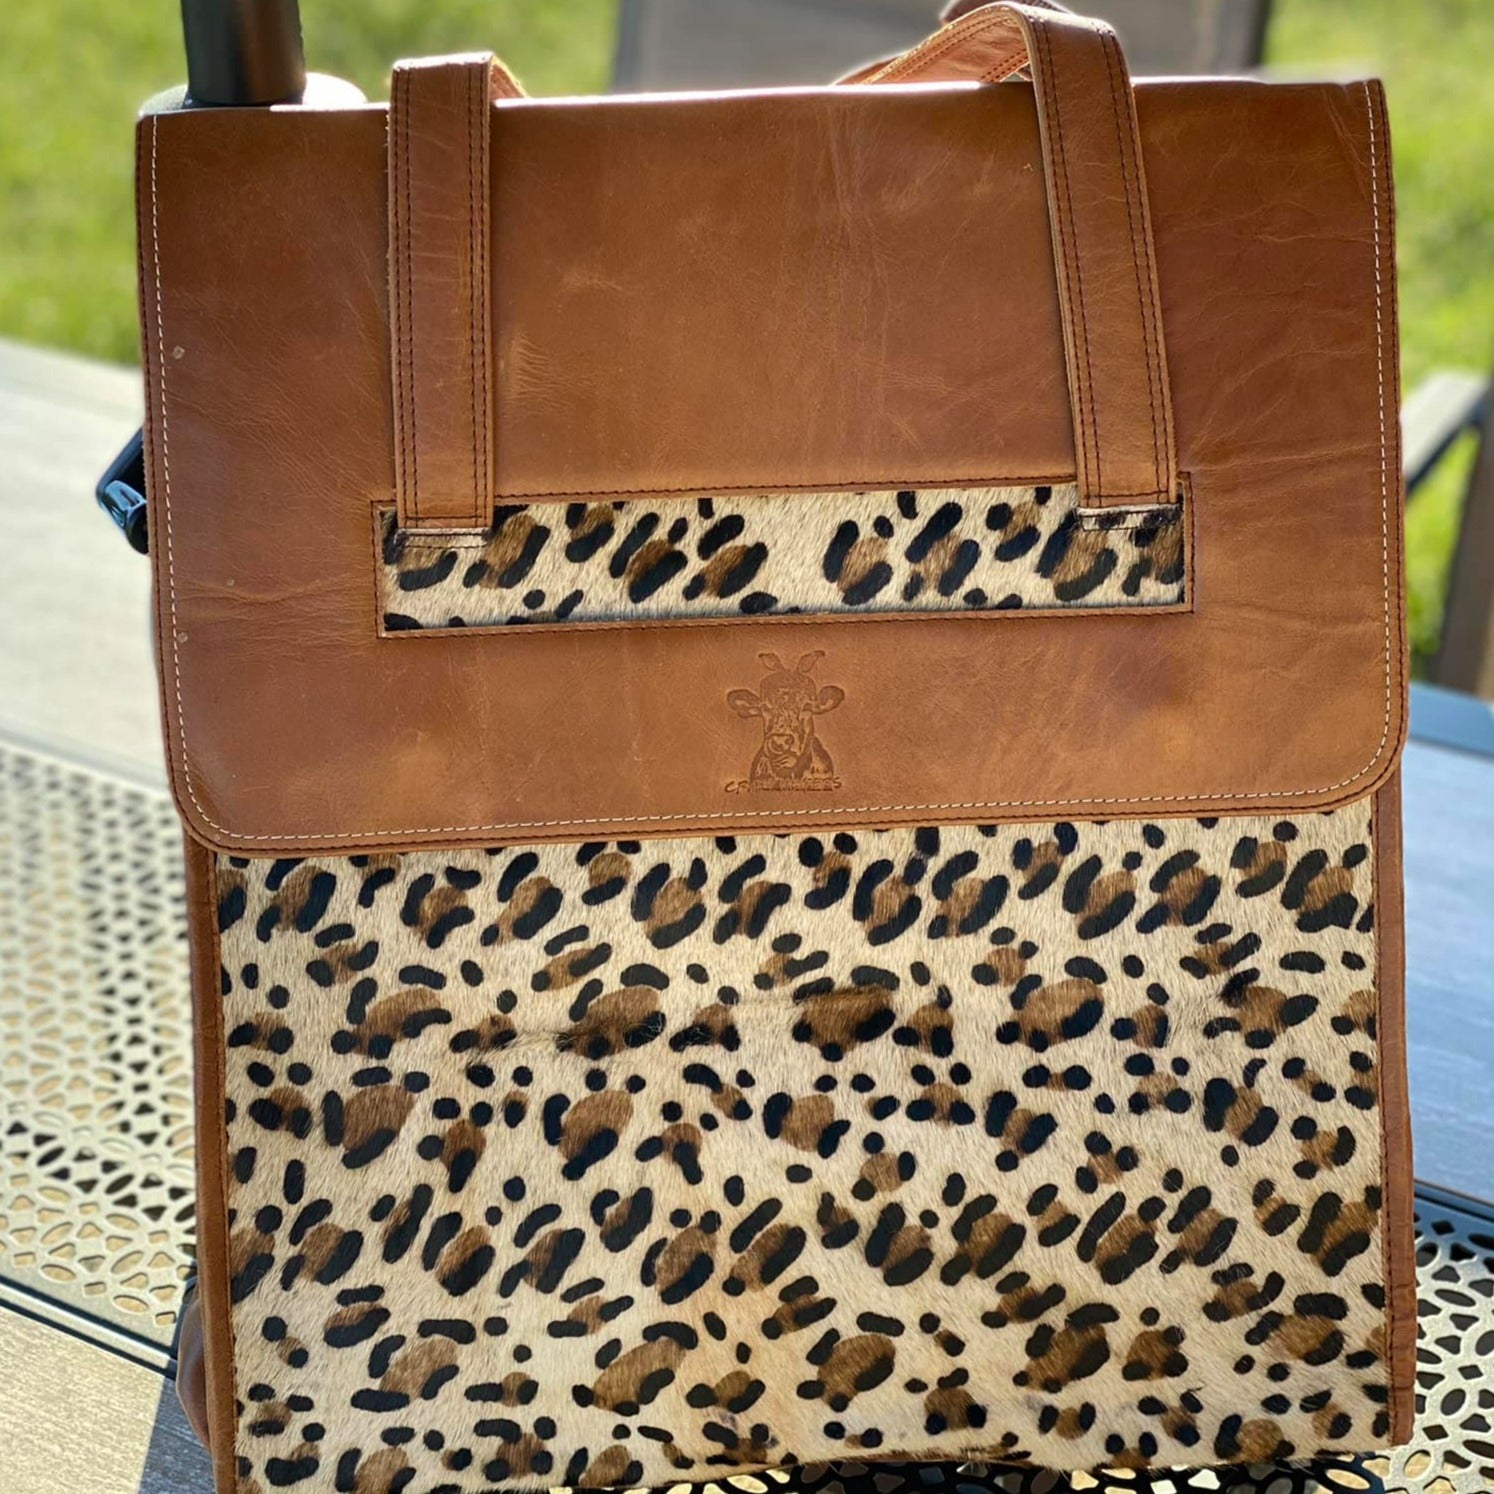 Large HOH Bag-Leopard and Dark Brown Jersey Prints